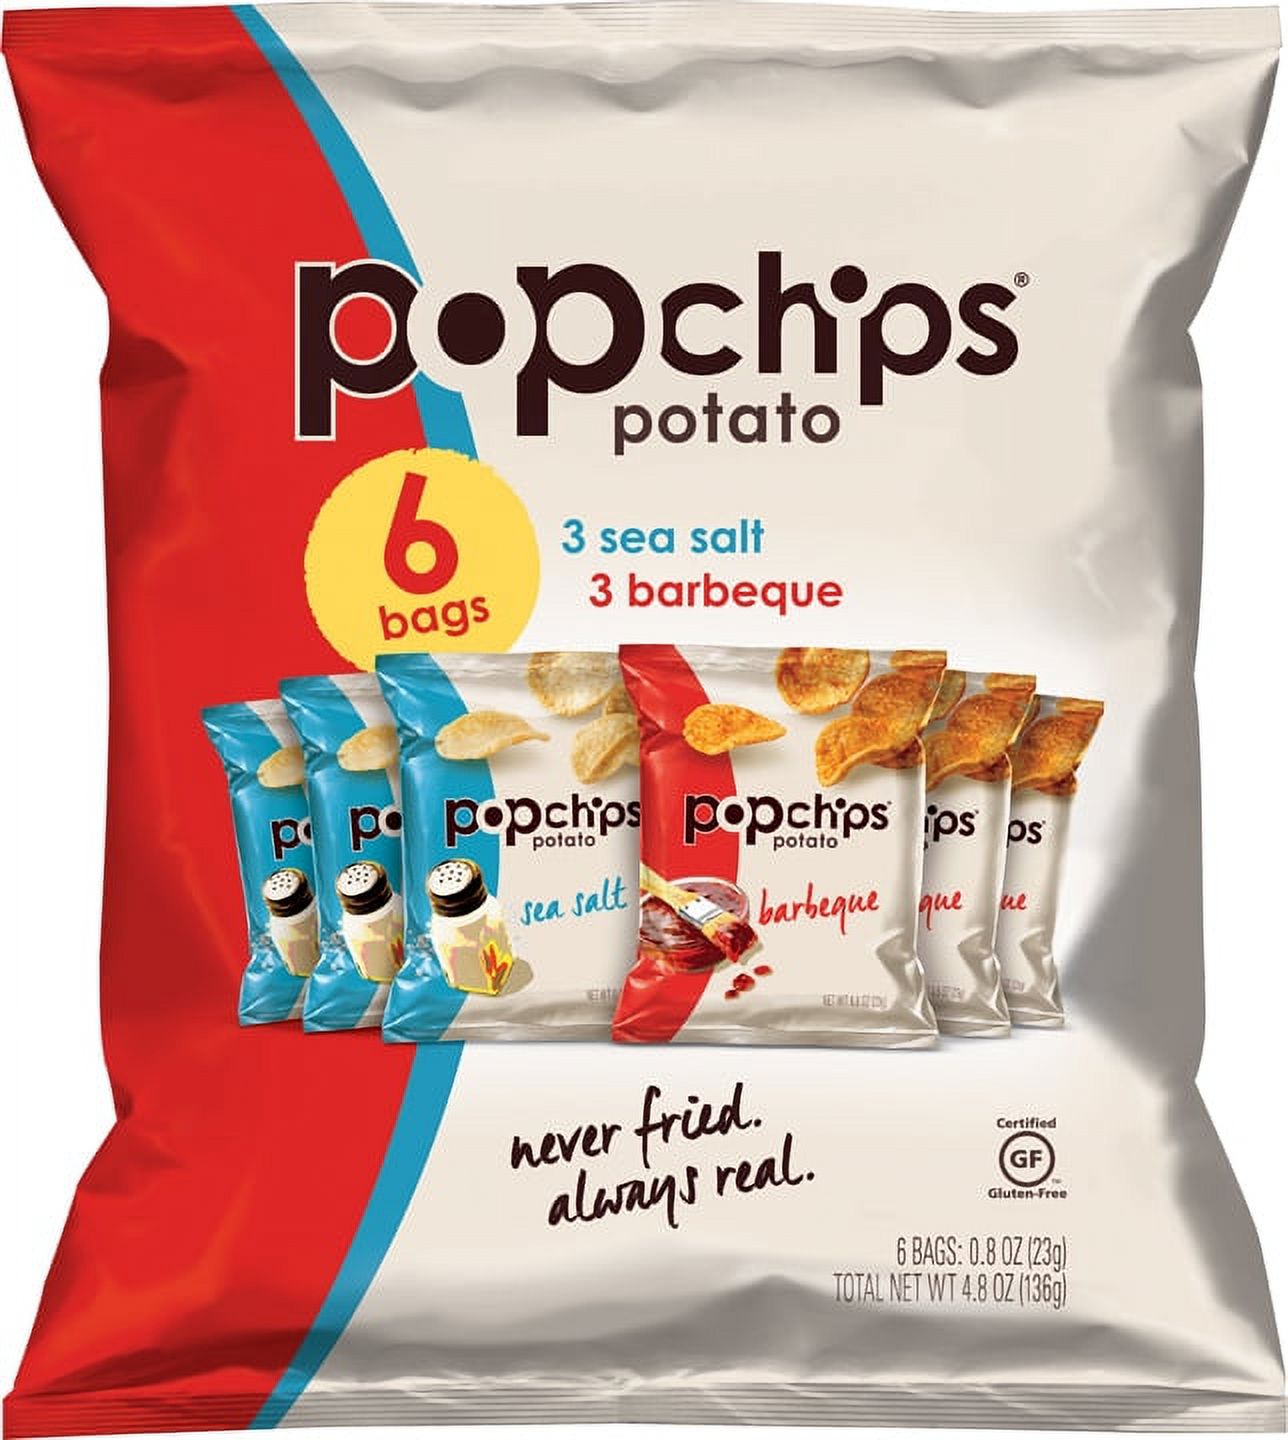 Popchips variety pack, 6 CT - image 1 of 6